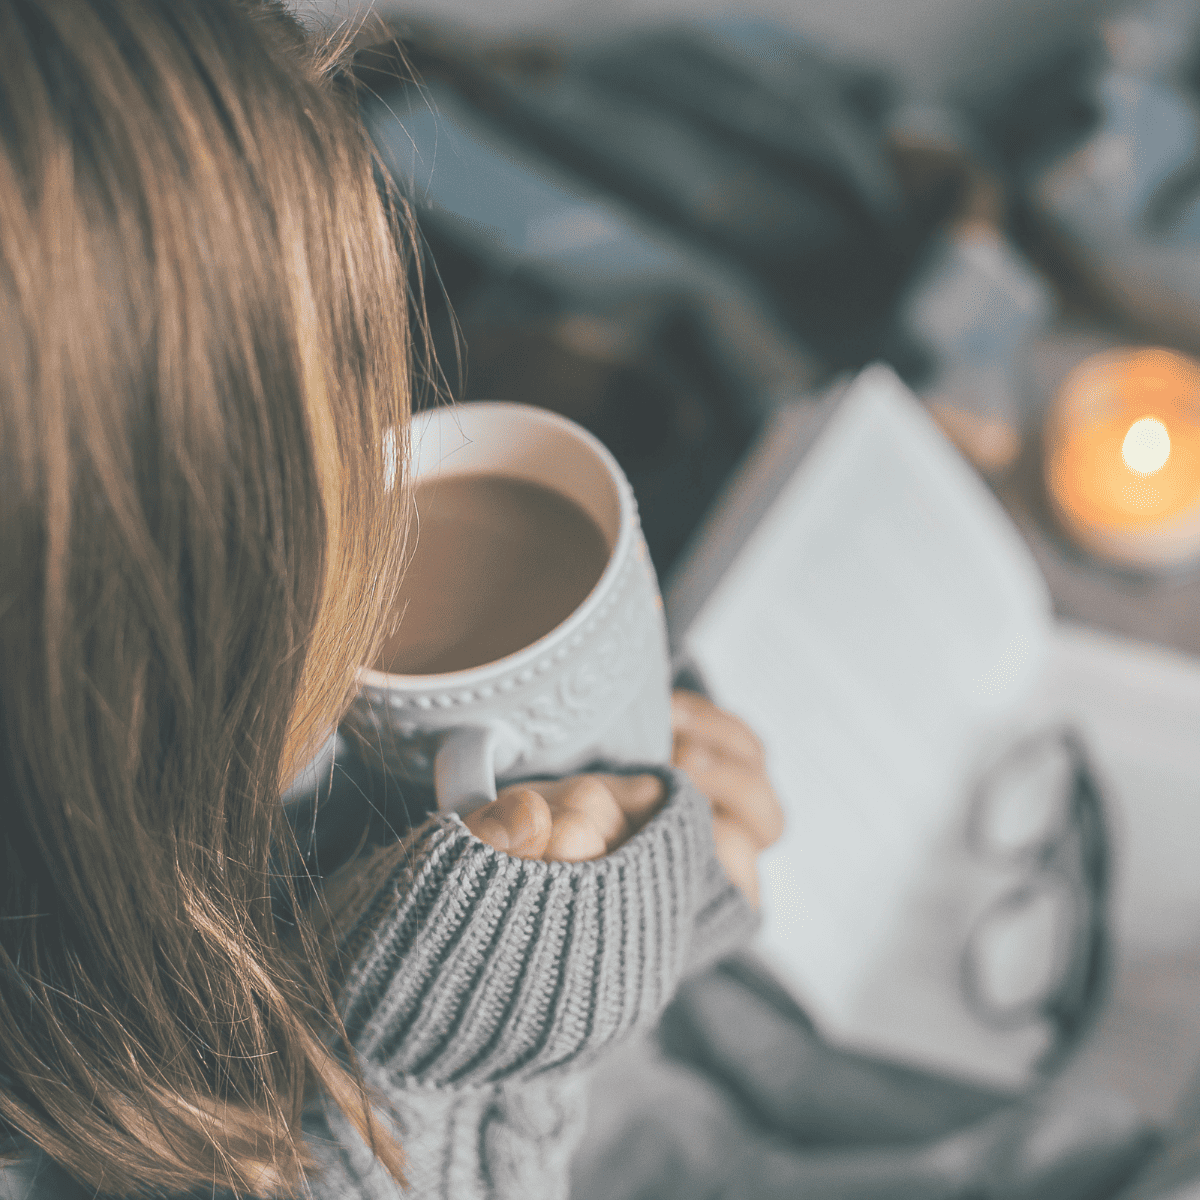 A woman sipping on a cup of hot cocoa practicing winter self-care and reading with candle.